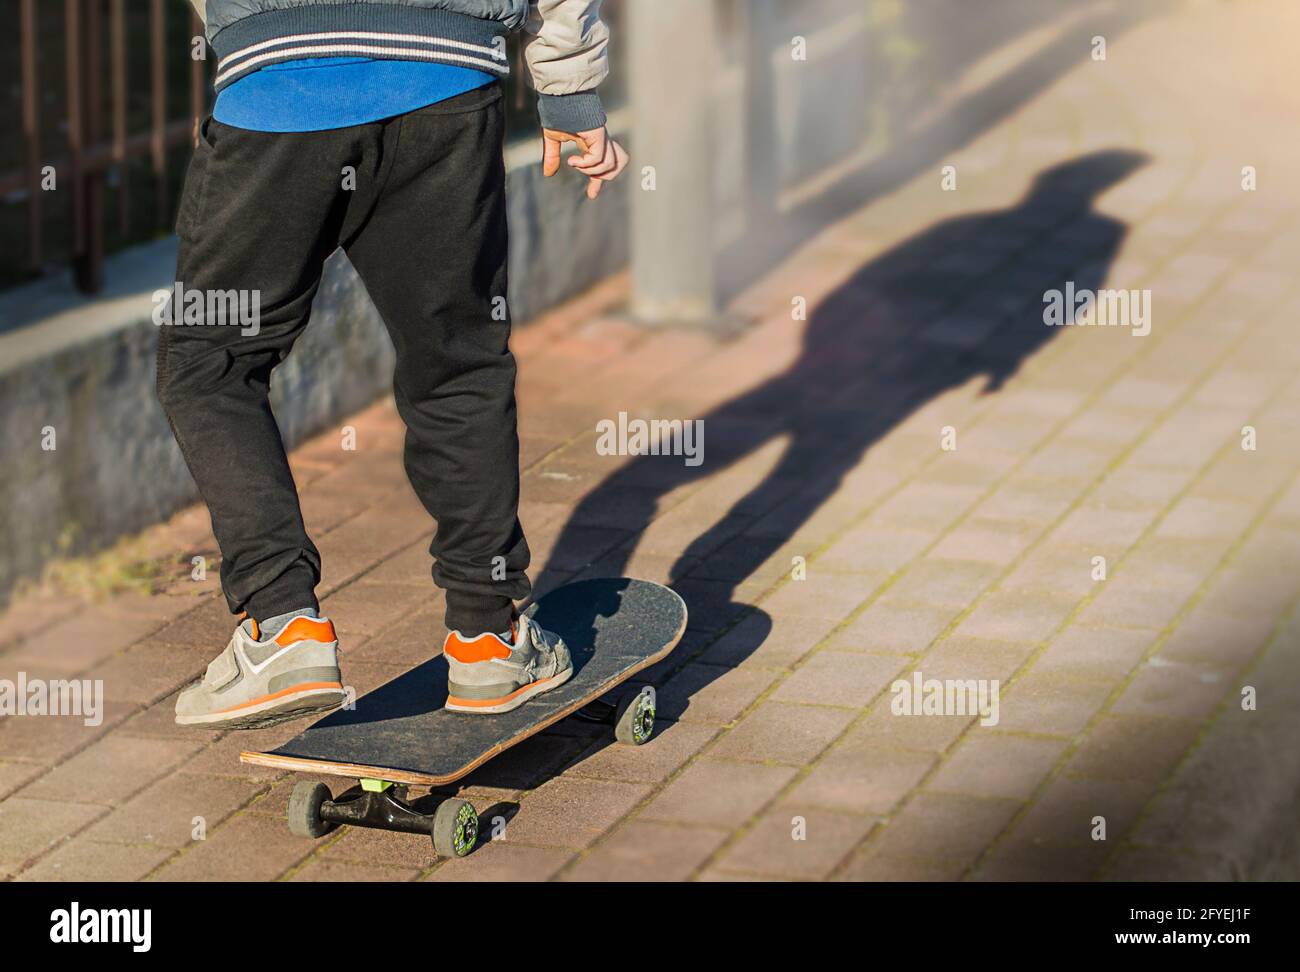 Adult youth man go speed on longboard skate on asphalt road. Mature people  enjoy outdoor leisure activity. Freedom and youthful lifestyle concept. Enj  Stock Photo - Alamy